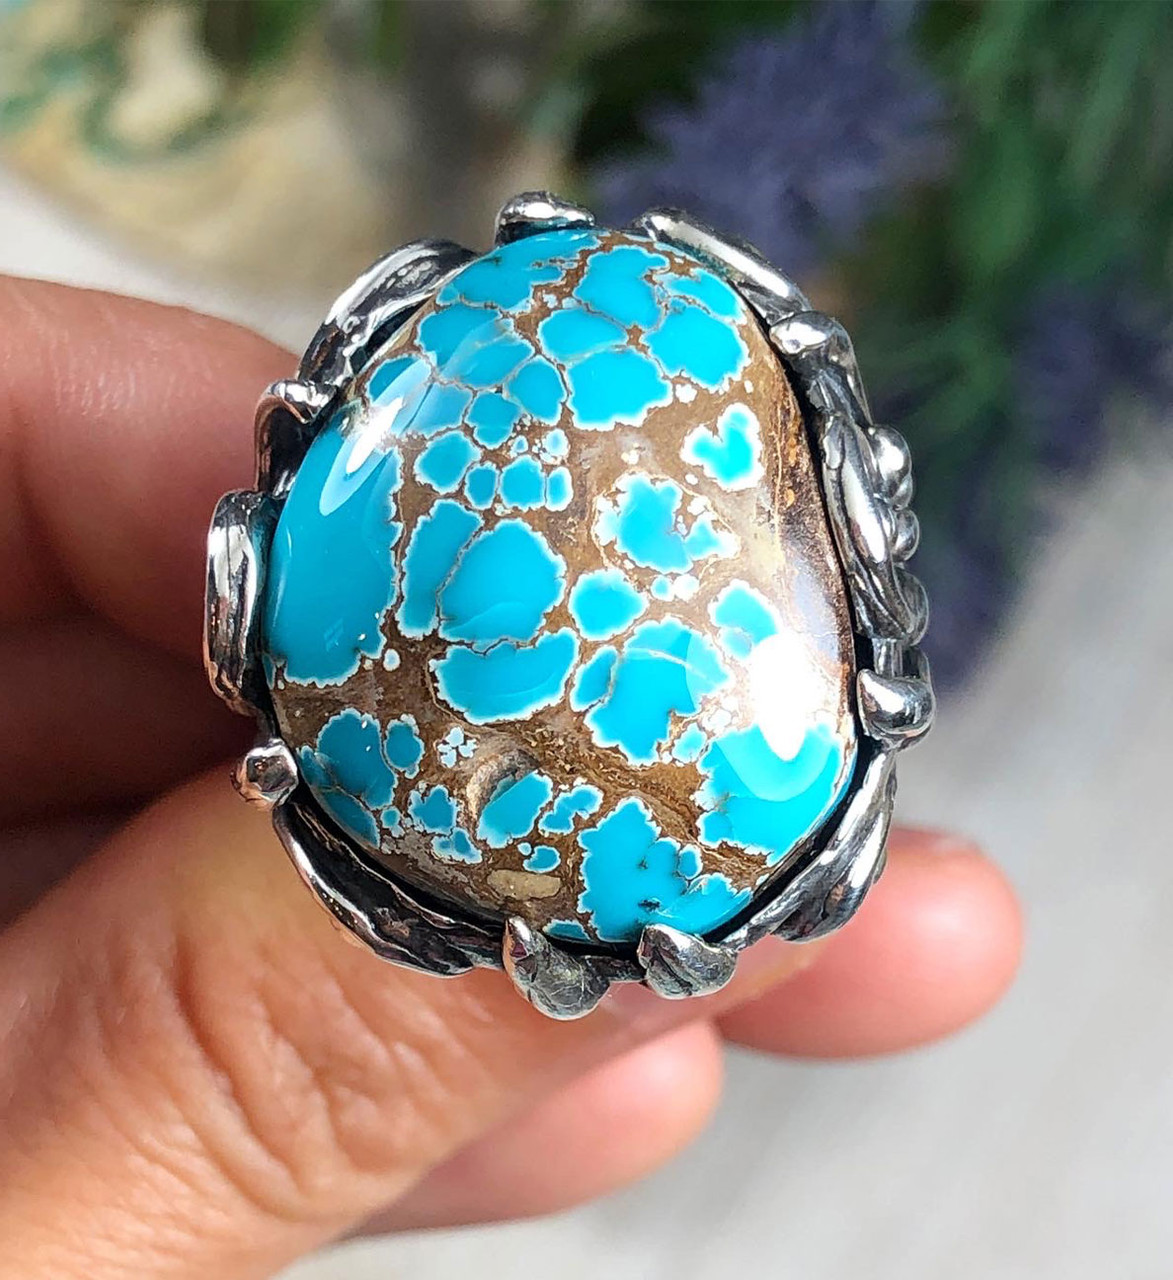 Buy Premium Sleeping Beauty Turquoise Ring with Malgache Neon Apatite in  Vermeil YG and Platinum Over Sterling Silver, Statement Rings For Women  4.50 ctw (Size 10.0) at ShopLC.